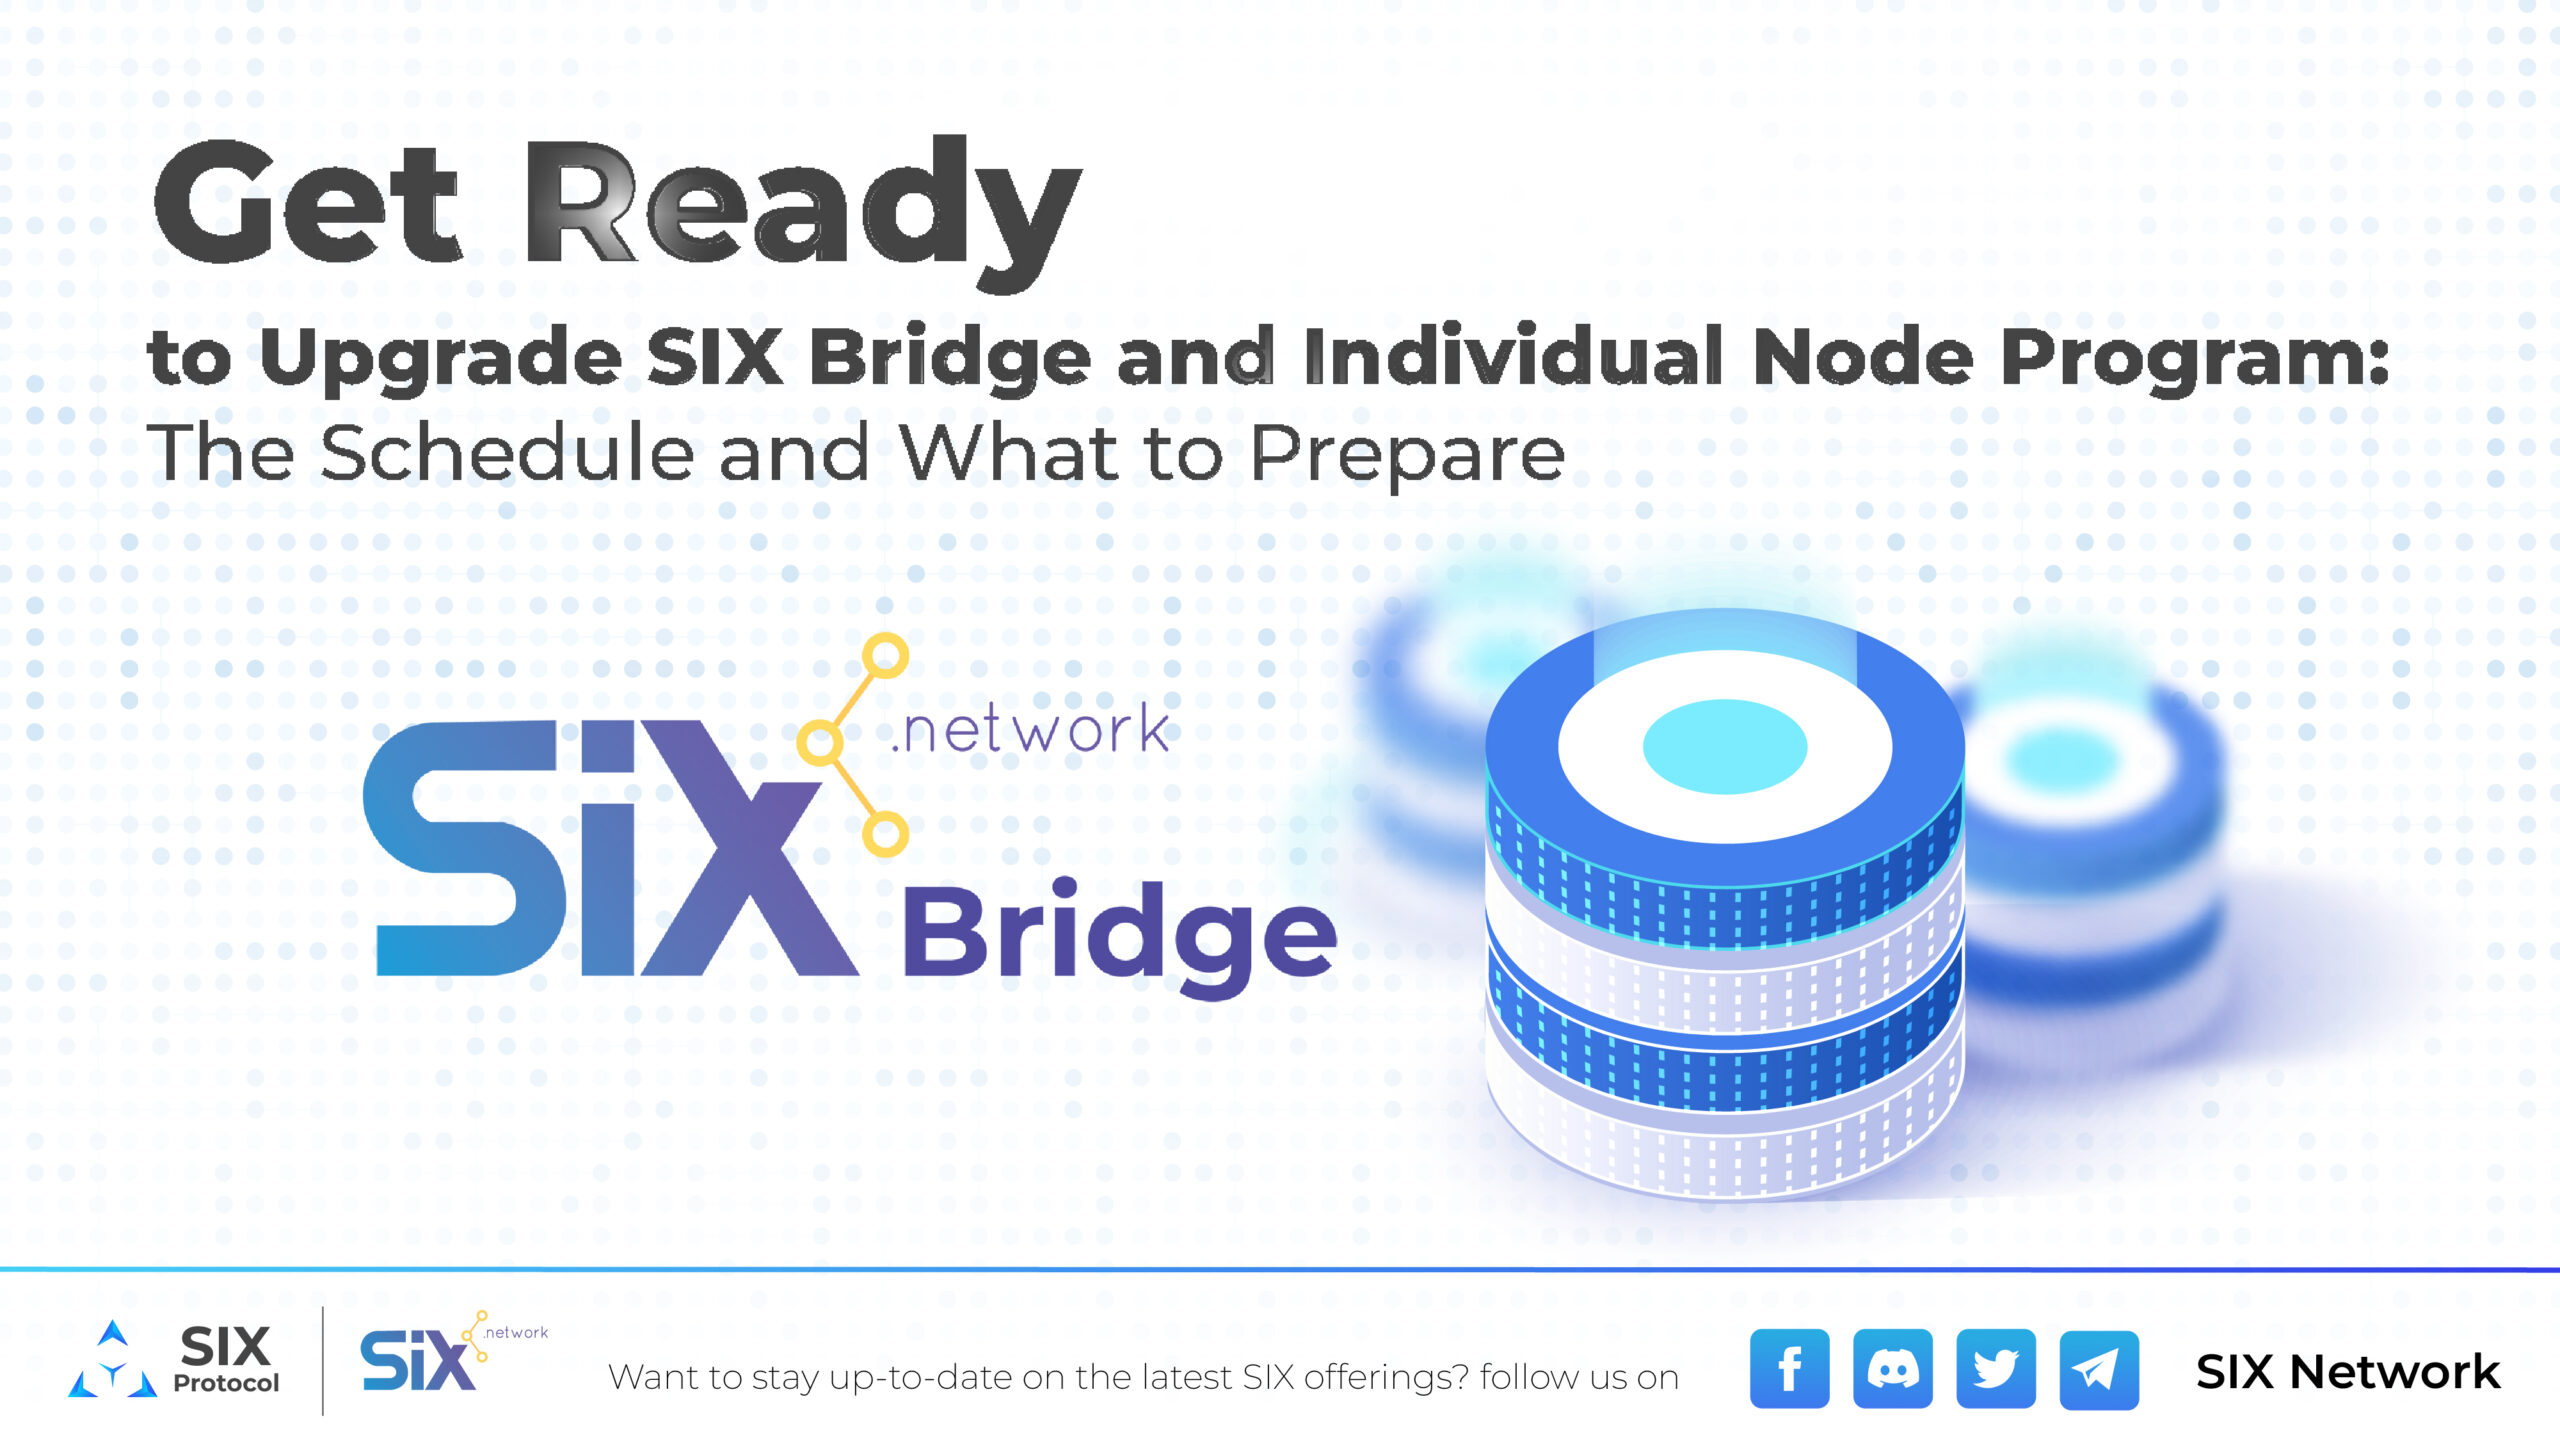 SIX Network Is Ready to Upgrade SIX Bridge and Individual Node Program: The Schedule and What to Prepare